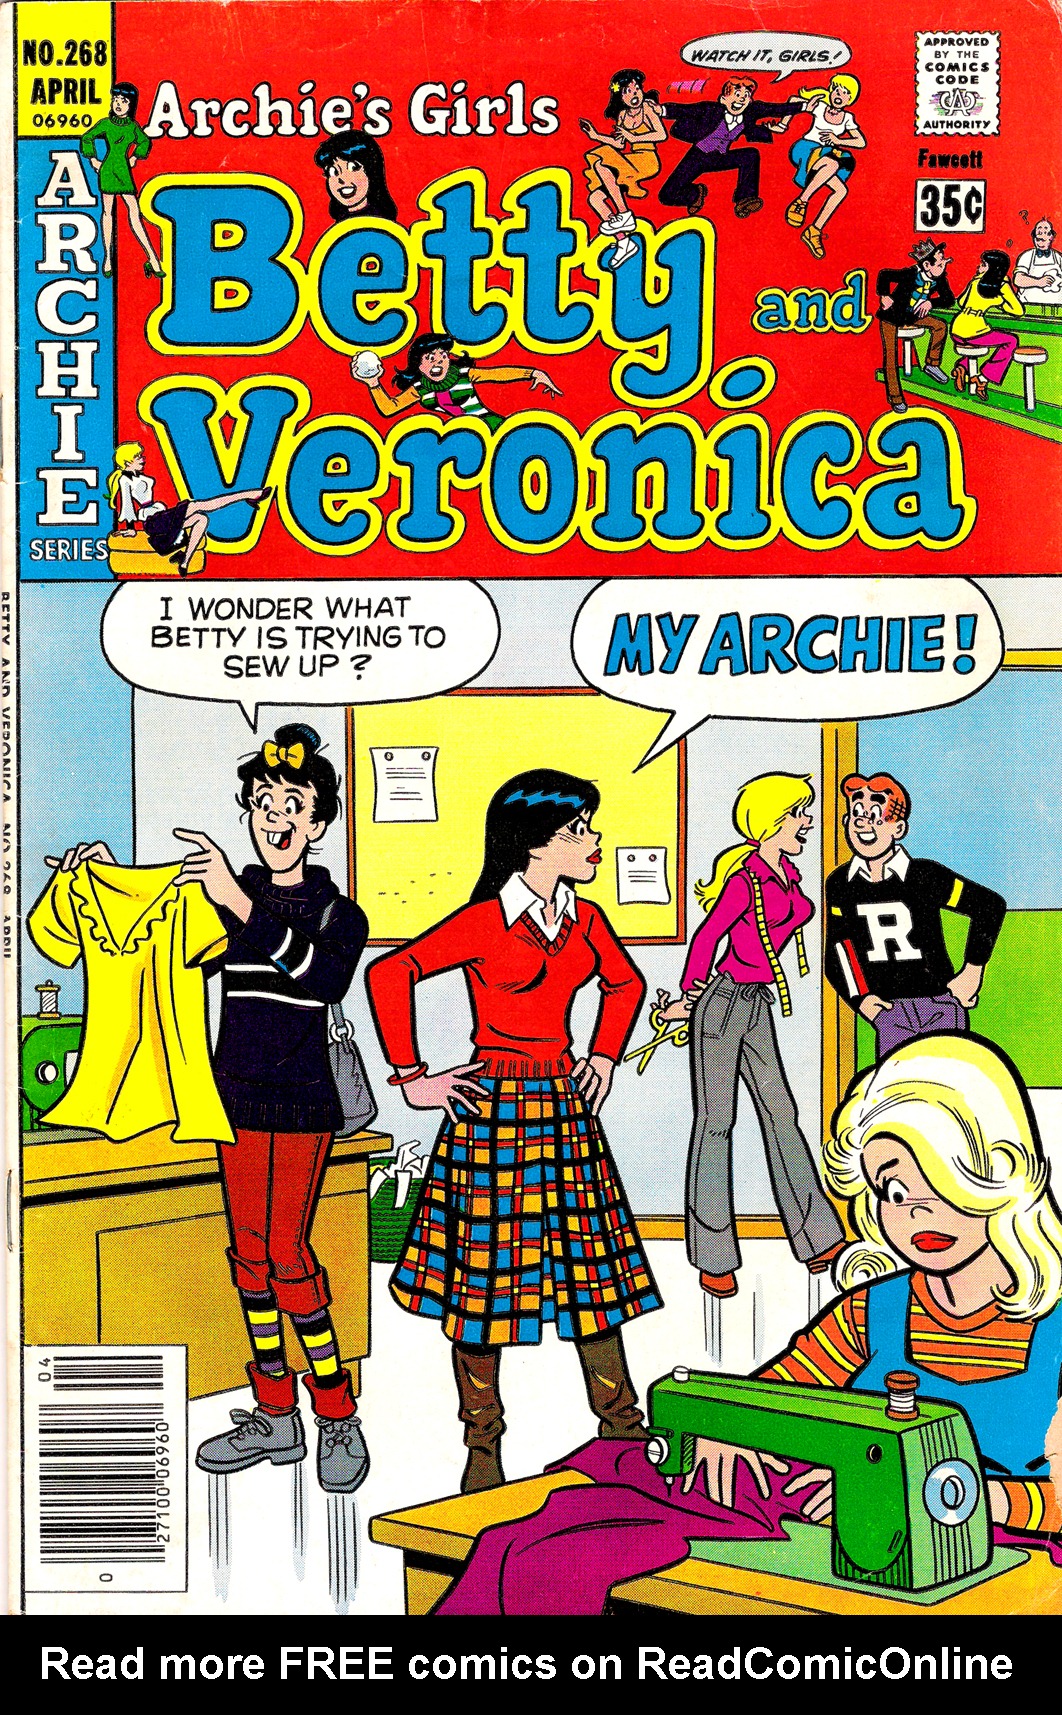 Read online Archie's Girls Betty and Veronica comic -  Issue #268 - 1